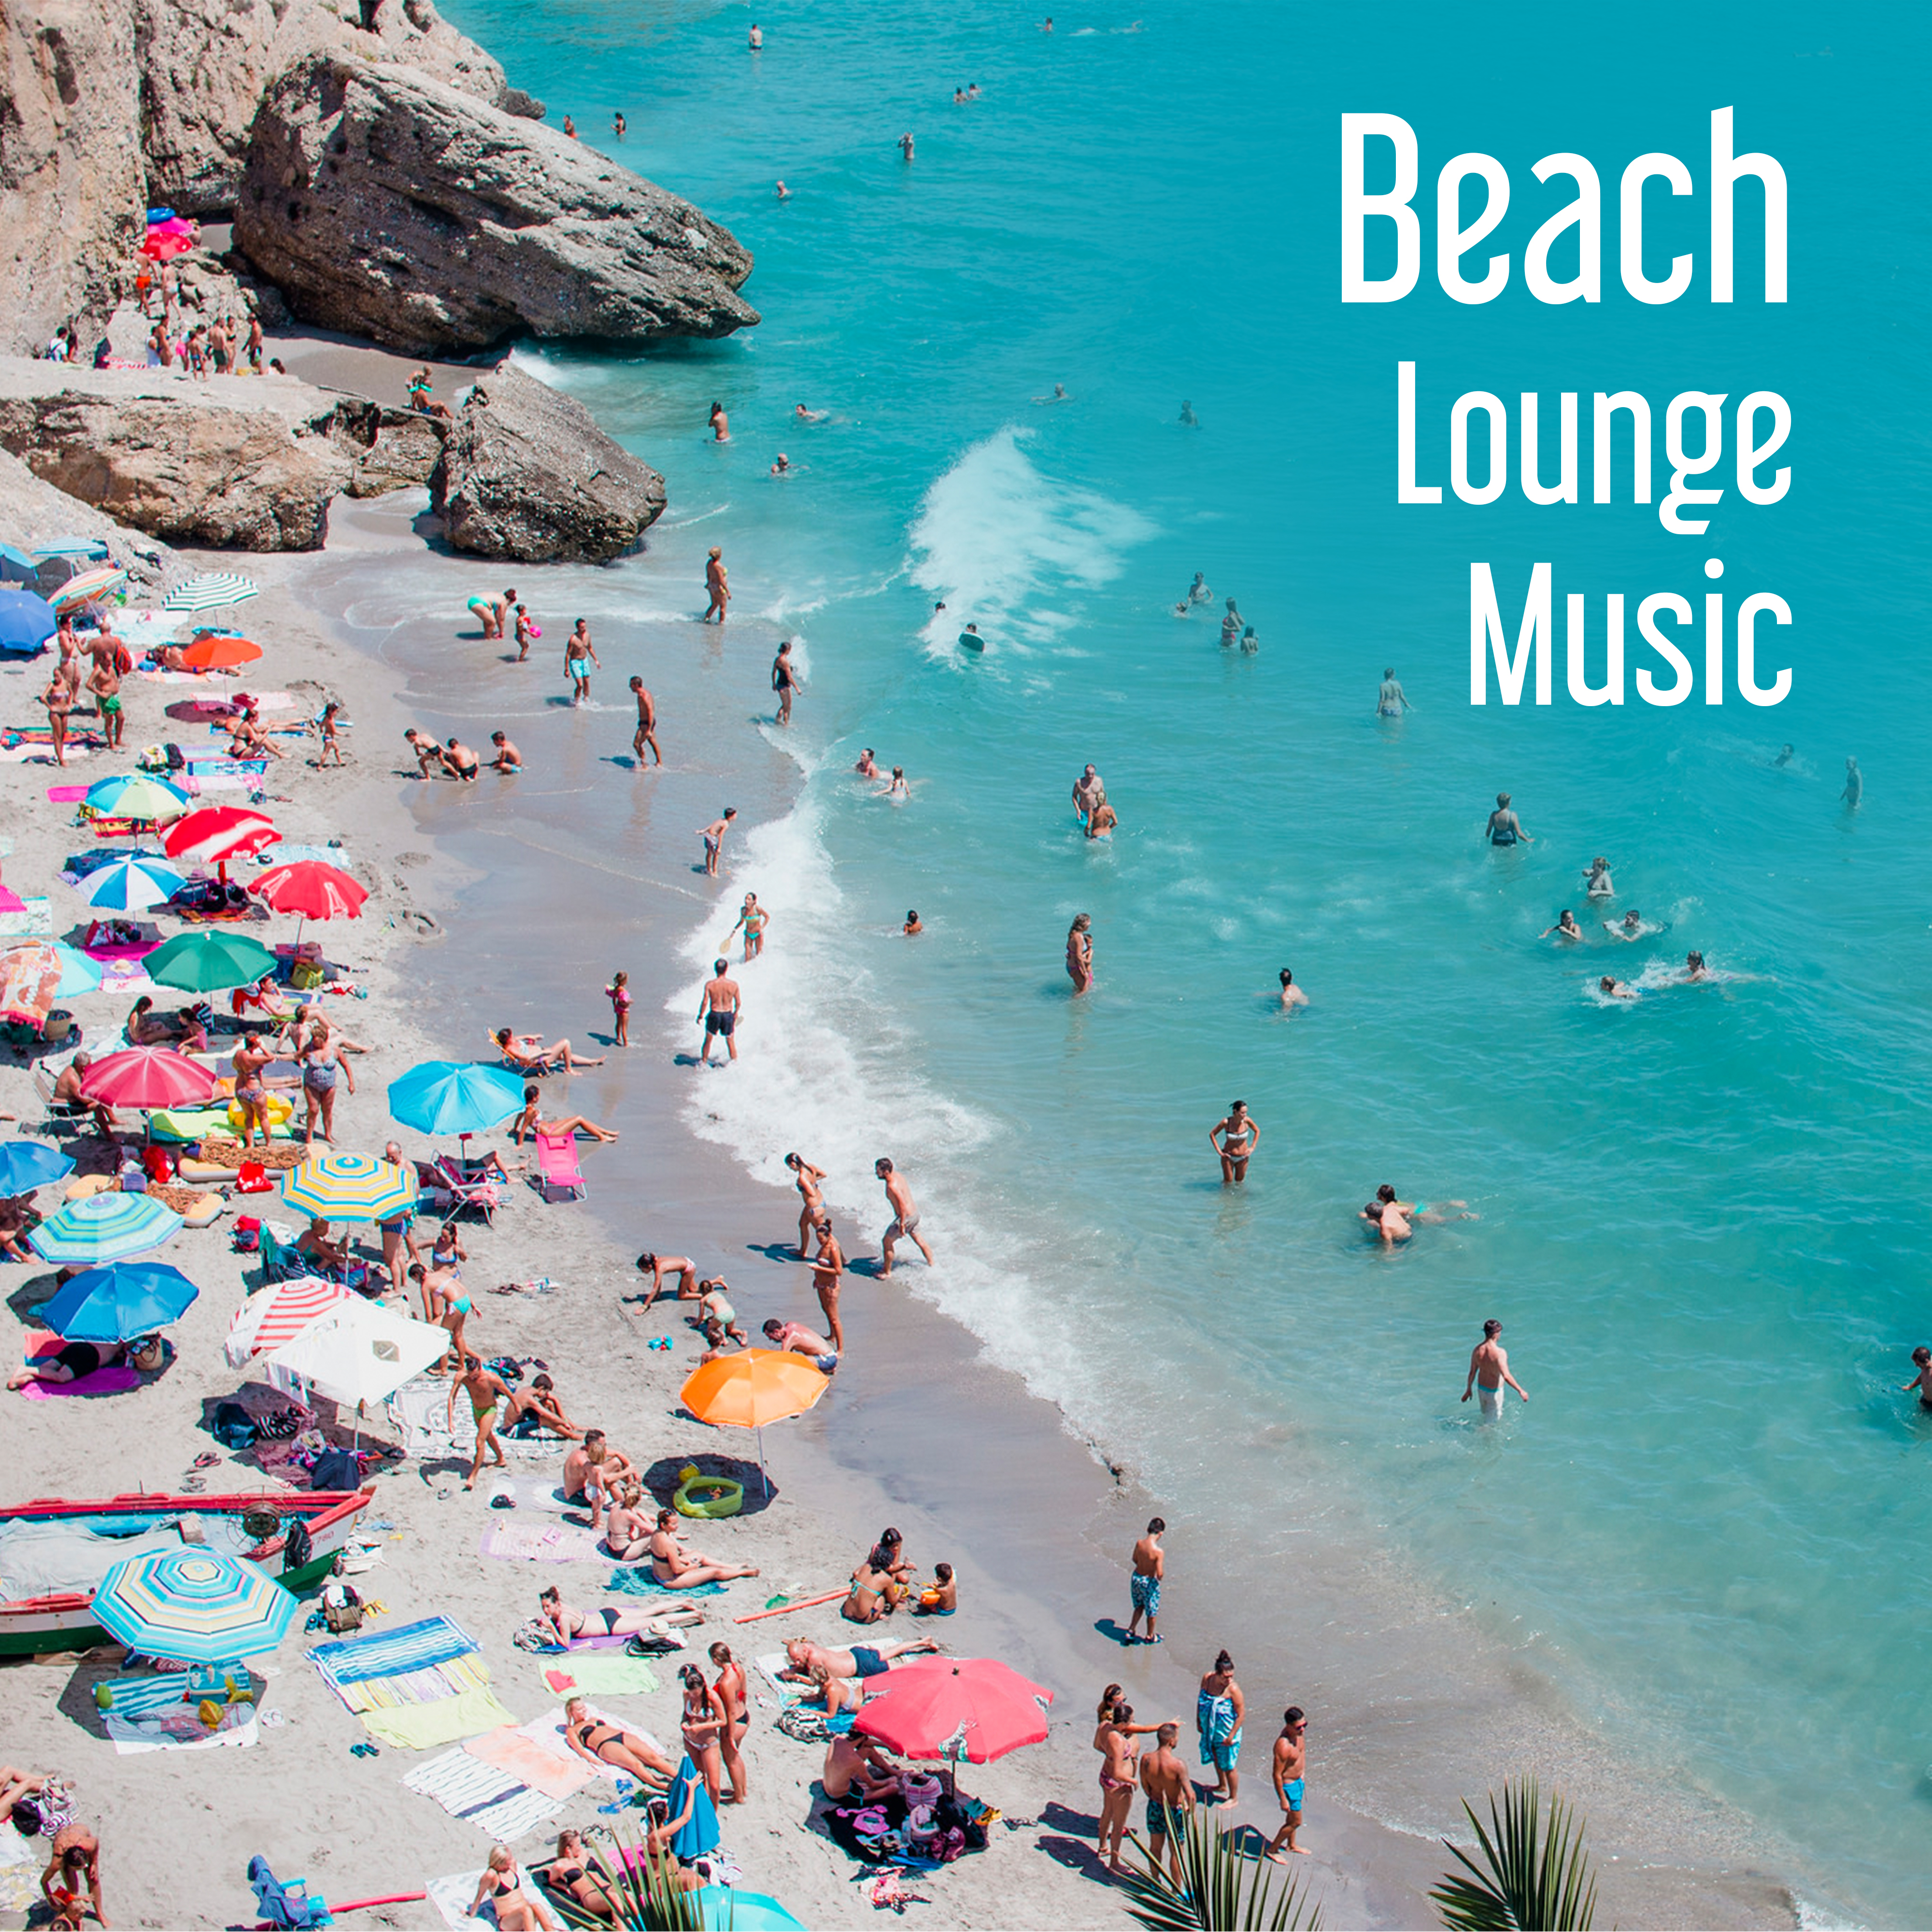 Beach Lounge Music – Relaxing Music for Summertime, No More Stress, Holiday Journey, Tropical Island